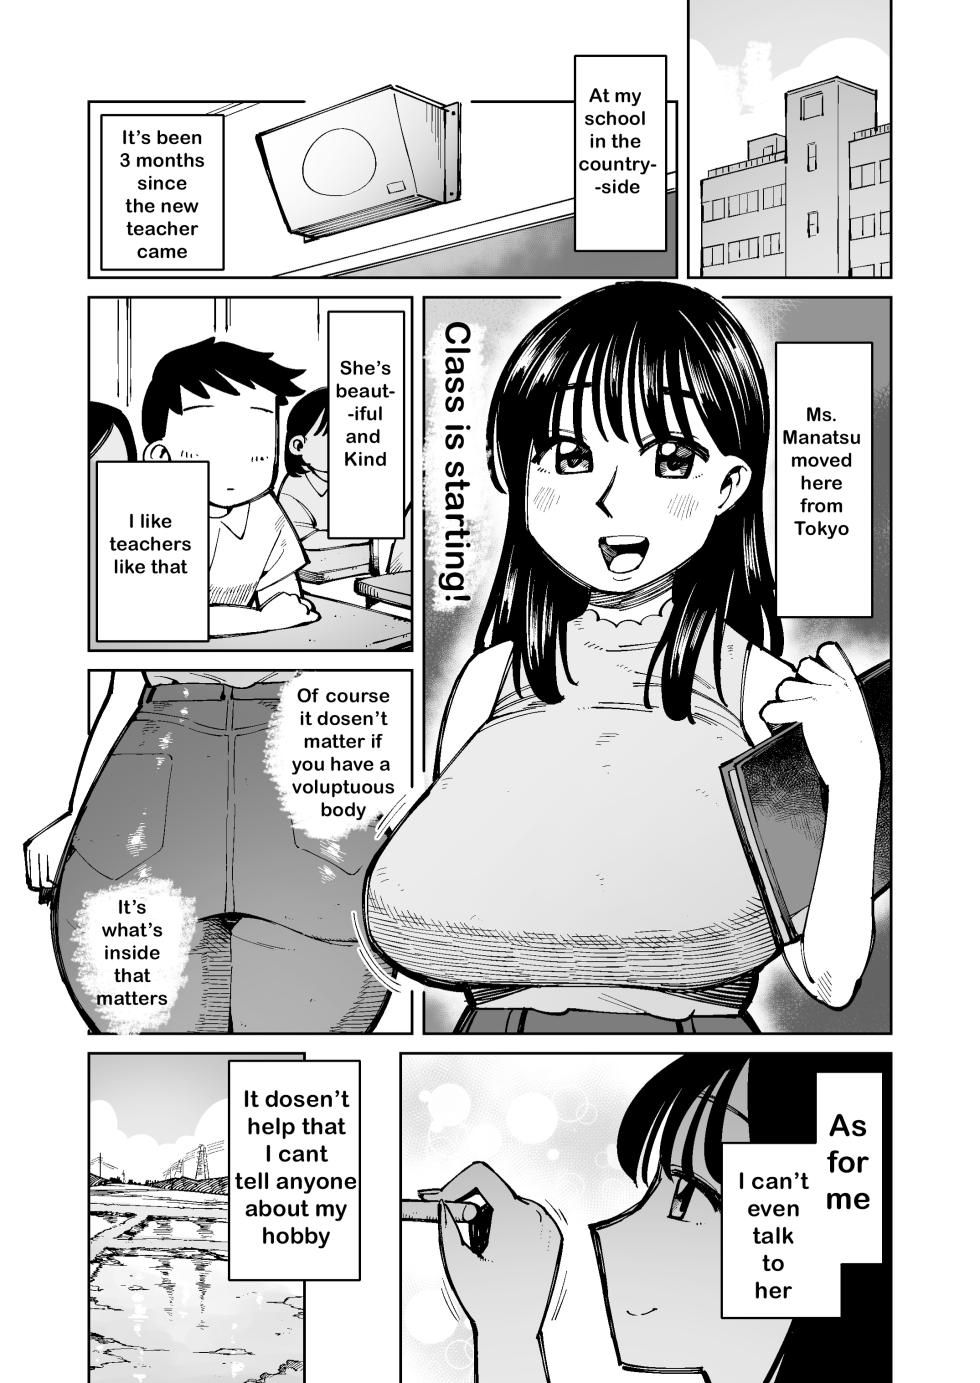 I pulled my favorite teacher into a rice field and had sex with her covered in mud! [WAM] - Page 1